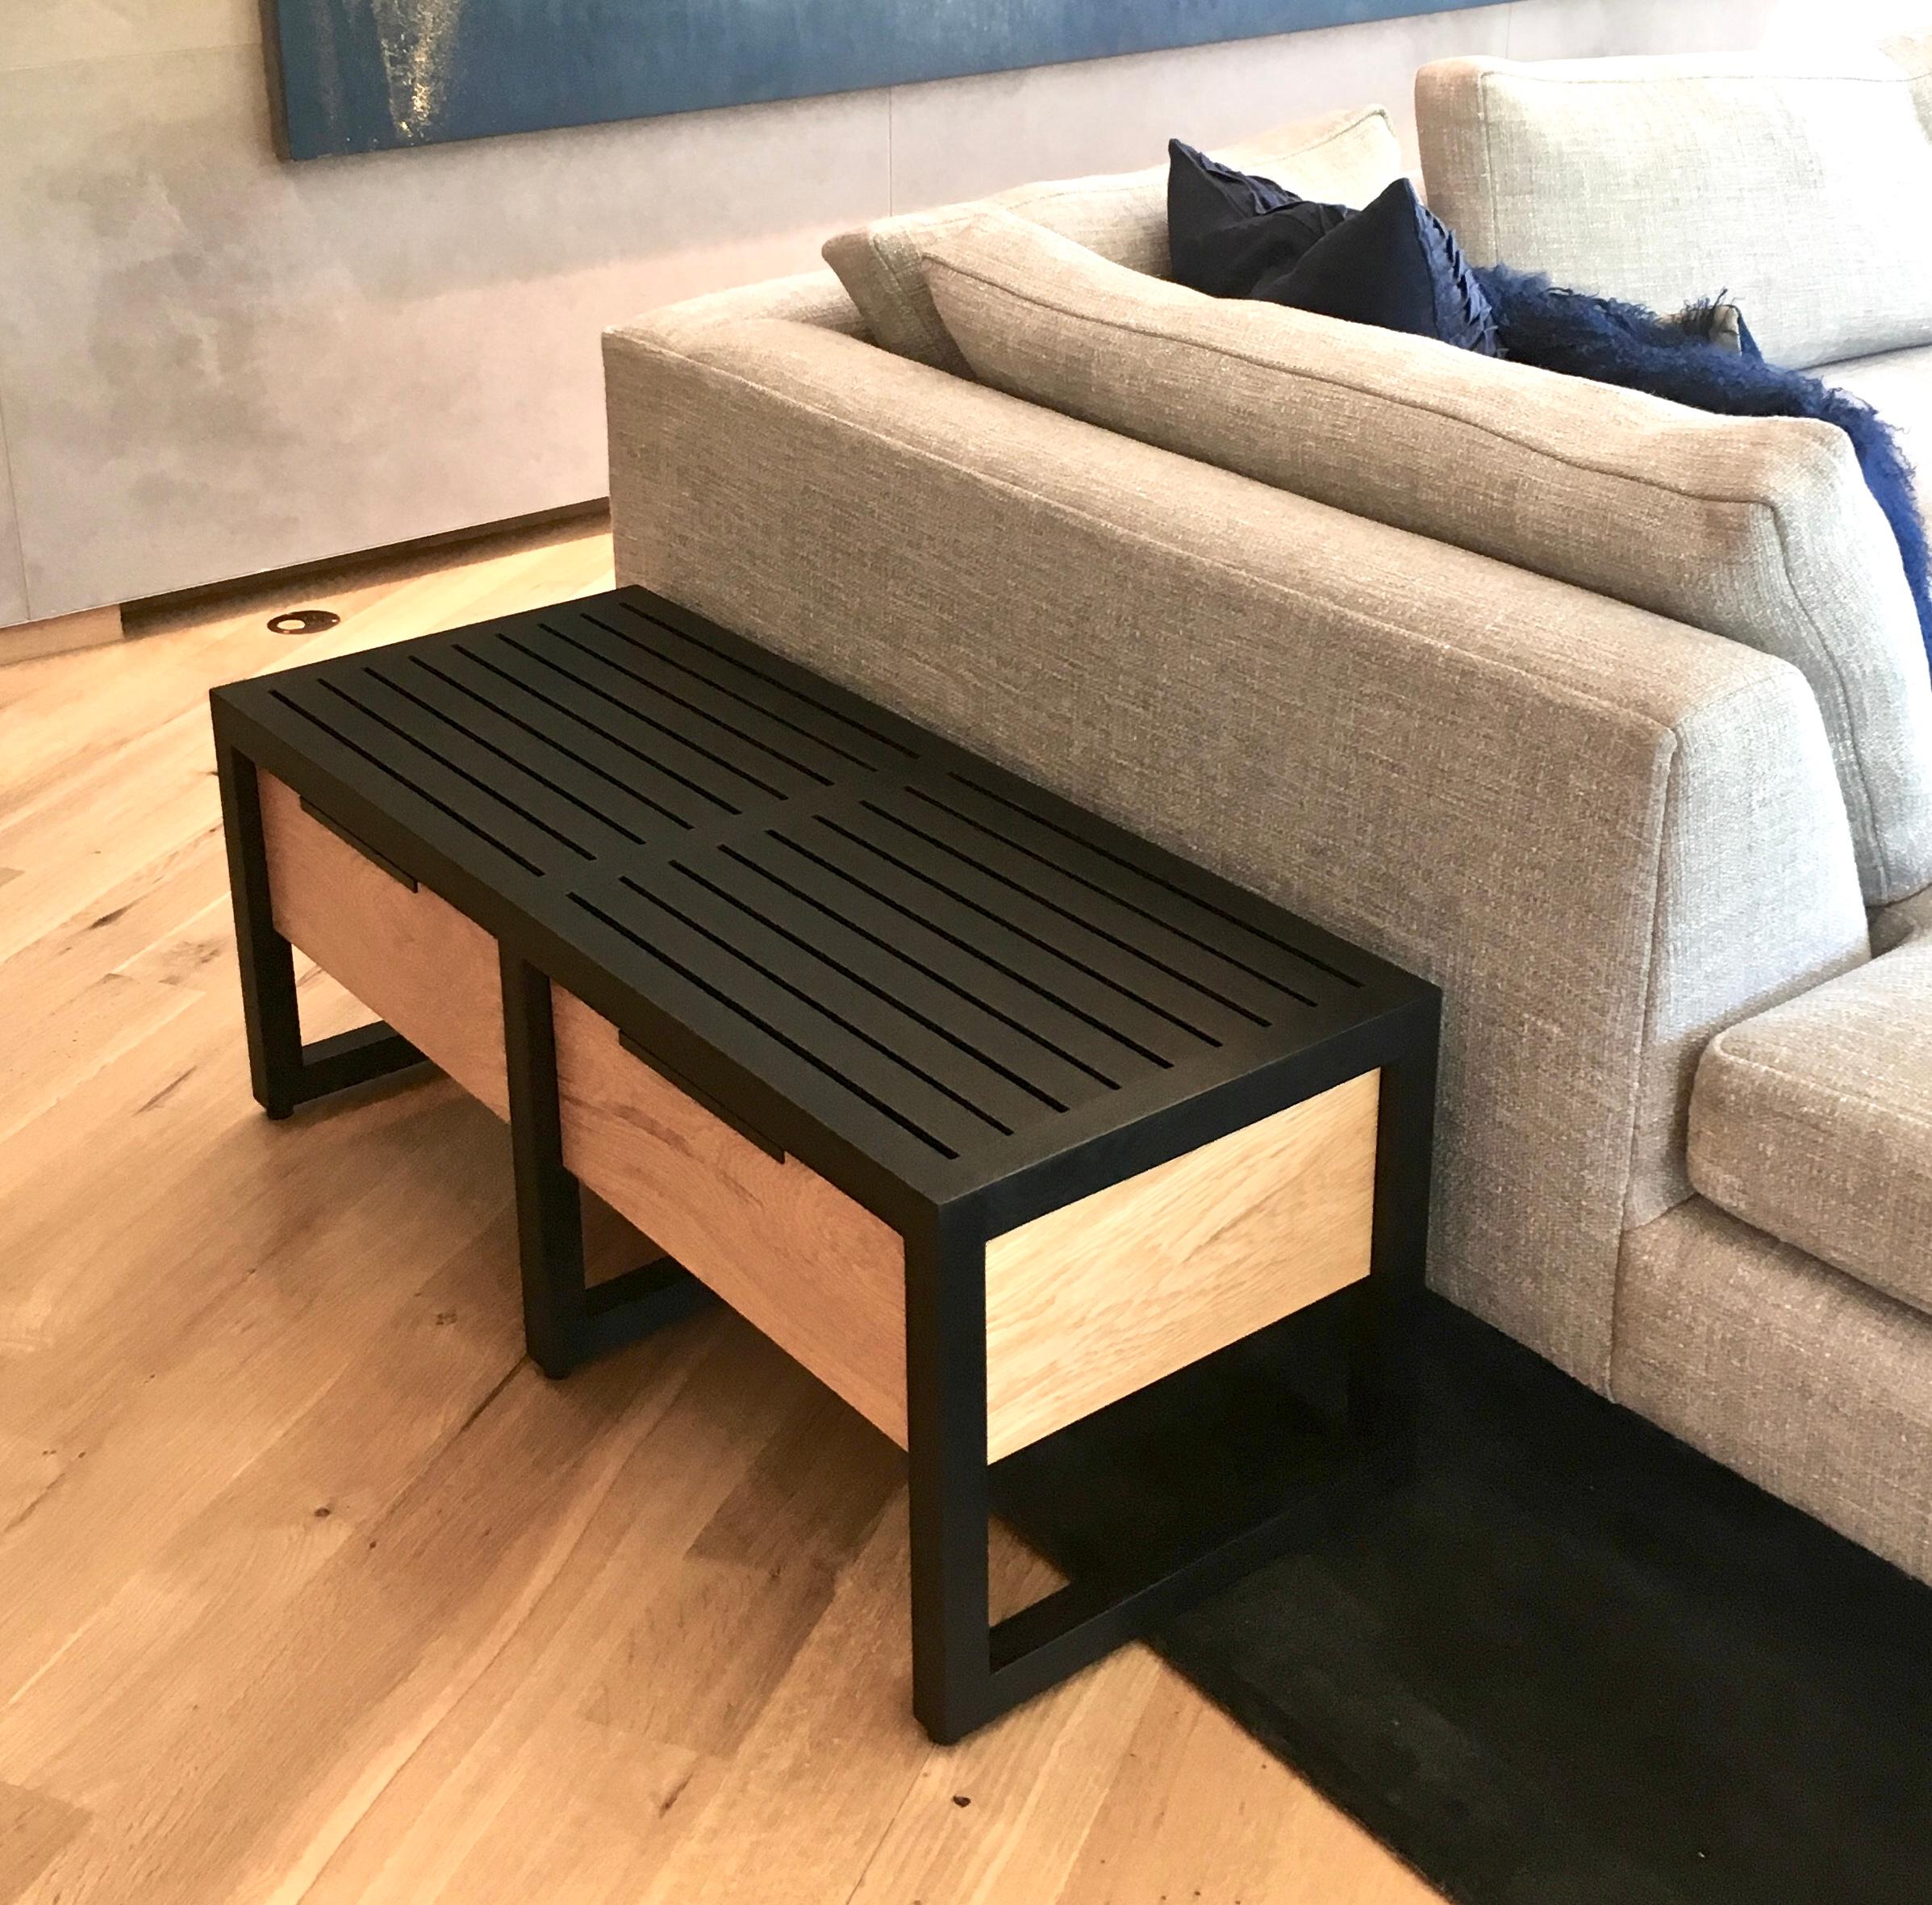 New York Heartwoods' Lewis bench adds elegant storage to midcentury-style design. The unique black veining of spalted maple wraps around the contiguous panels and drawer fronts, complimenting the ebonized oak frame. Each bench is made by hand using